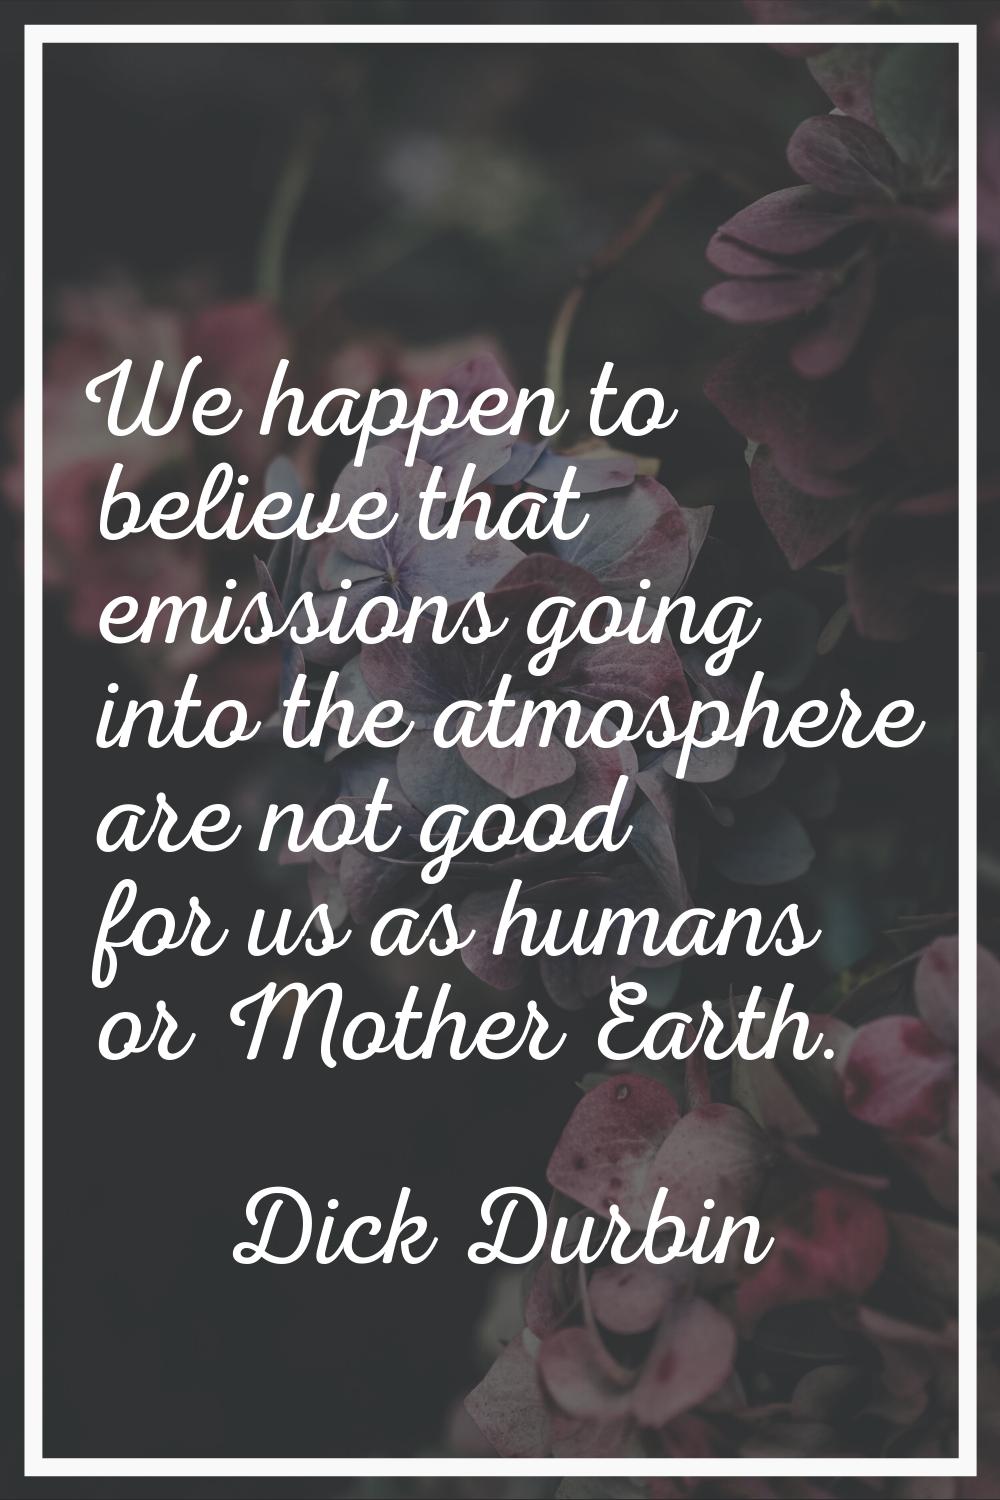 We happen to believe that emissions going into the atmosphere are not good for us as humans or Moth